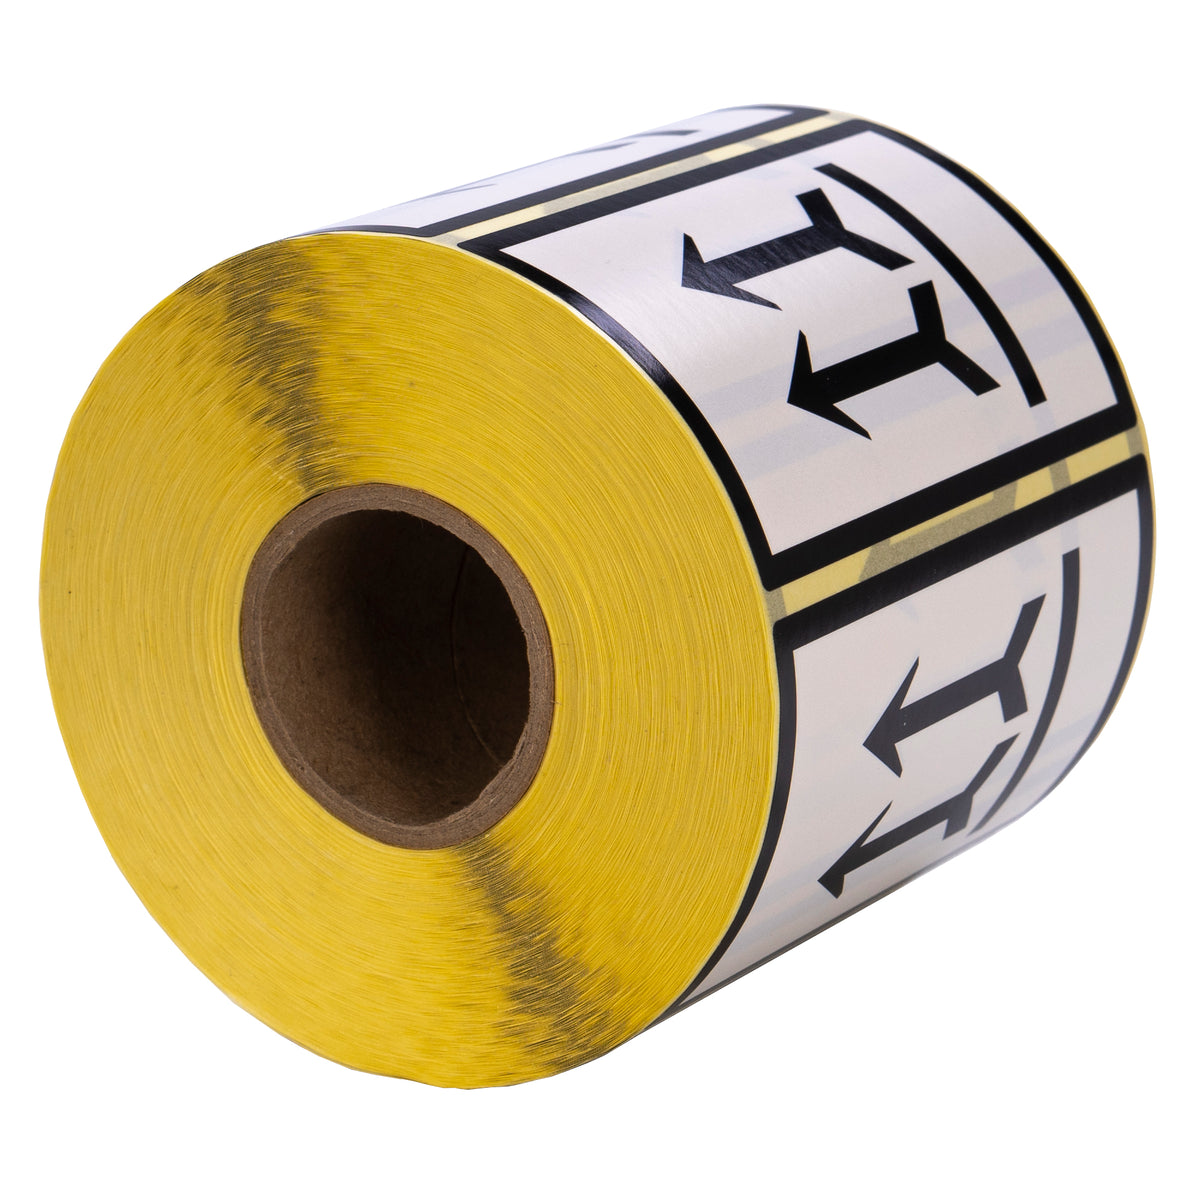 Warning labels This way up 100x60mm 1000 per roll